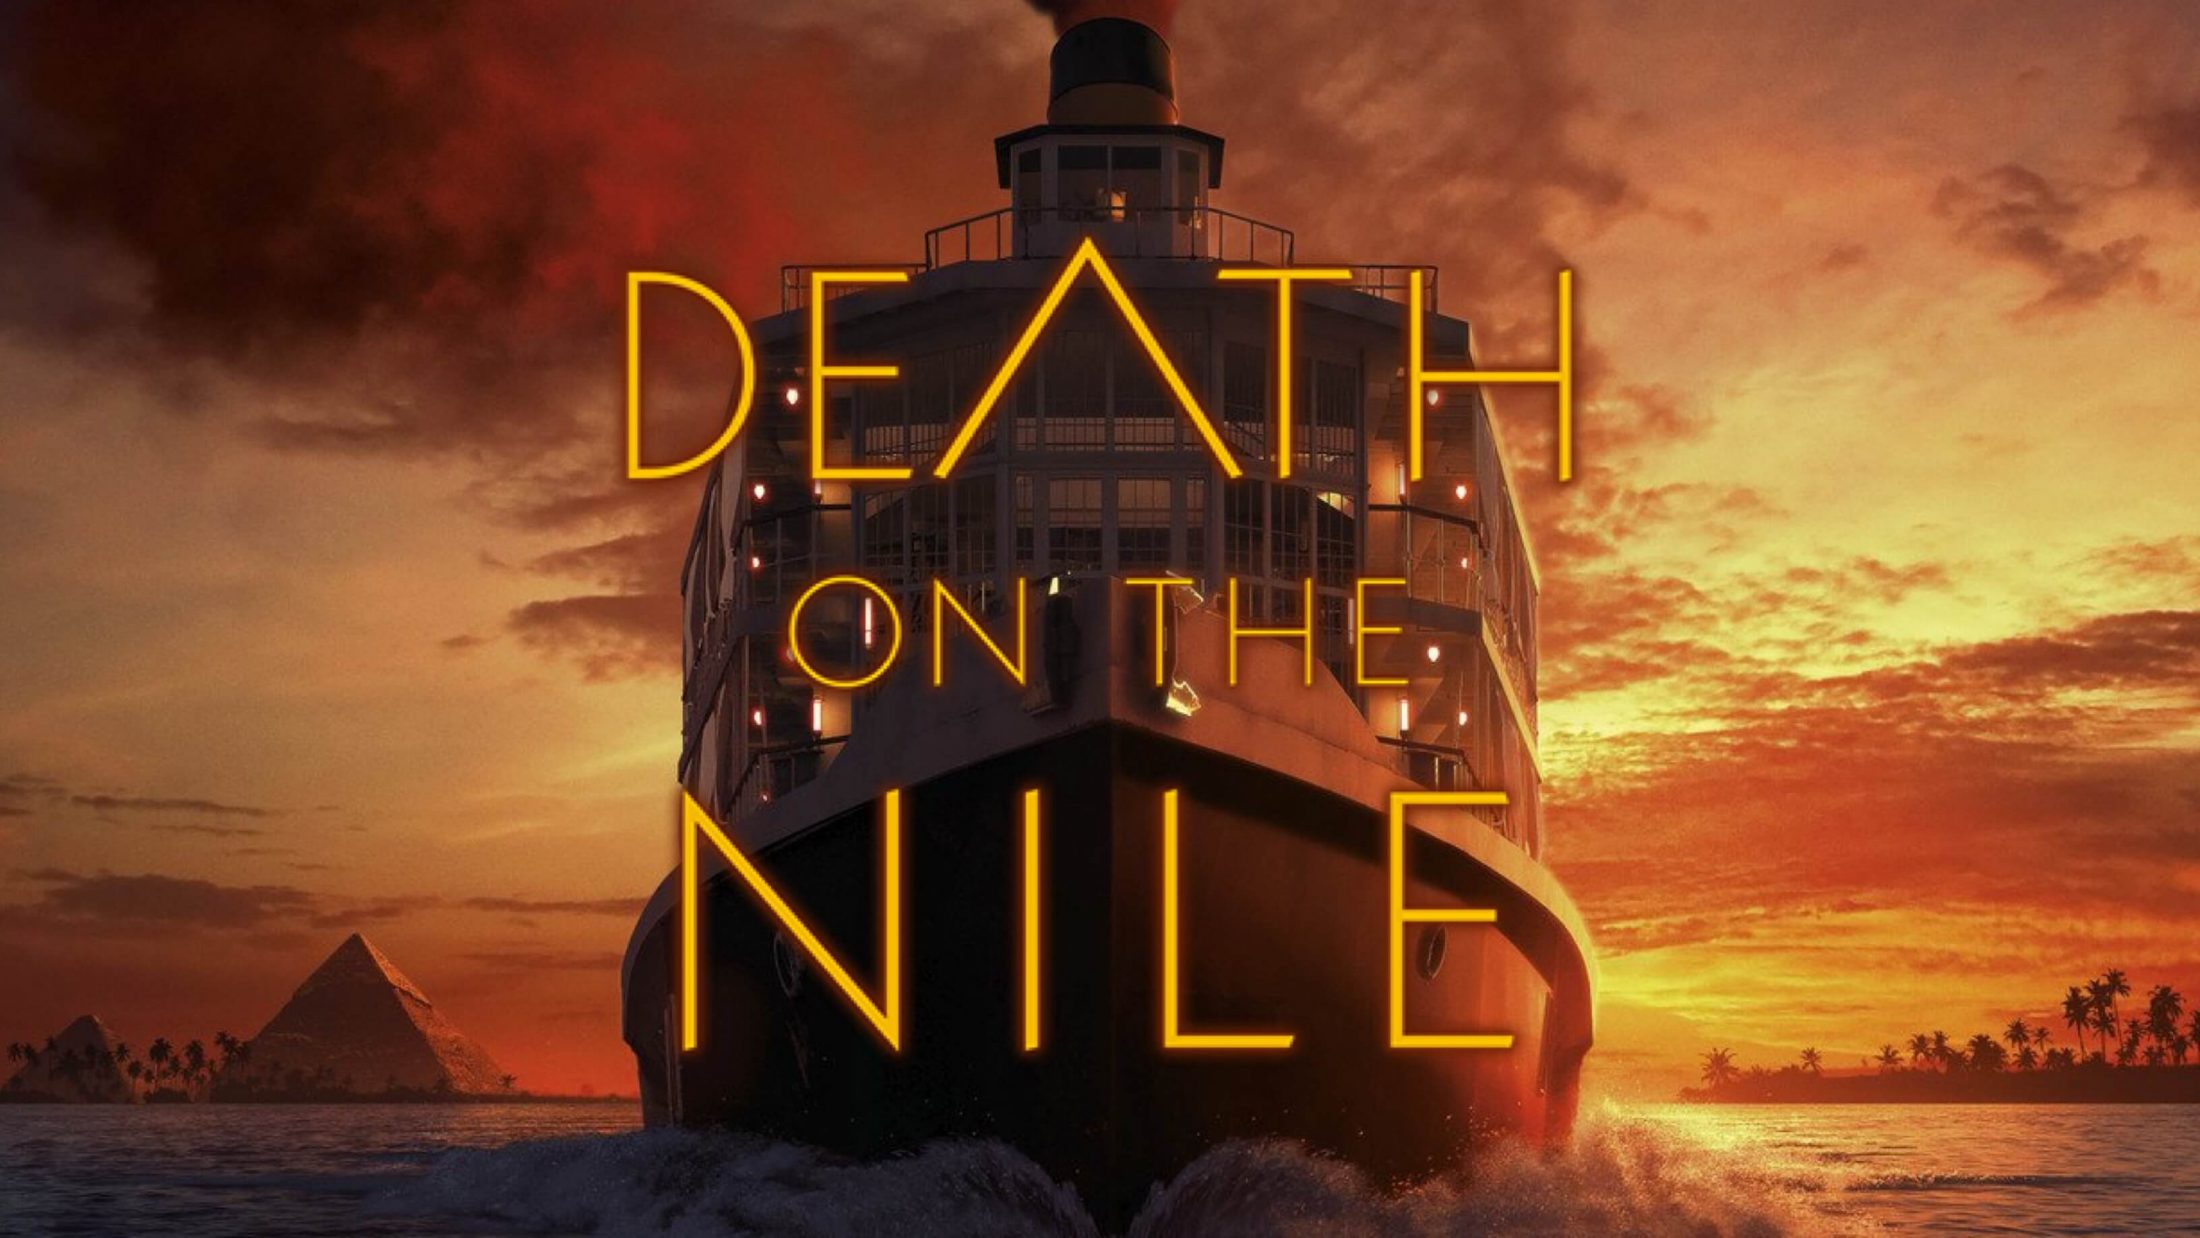 Barrett Brief Movie Review – A Slow Burn Death On The Nile